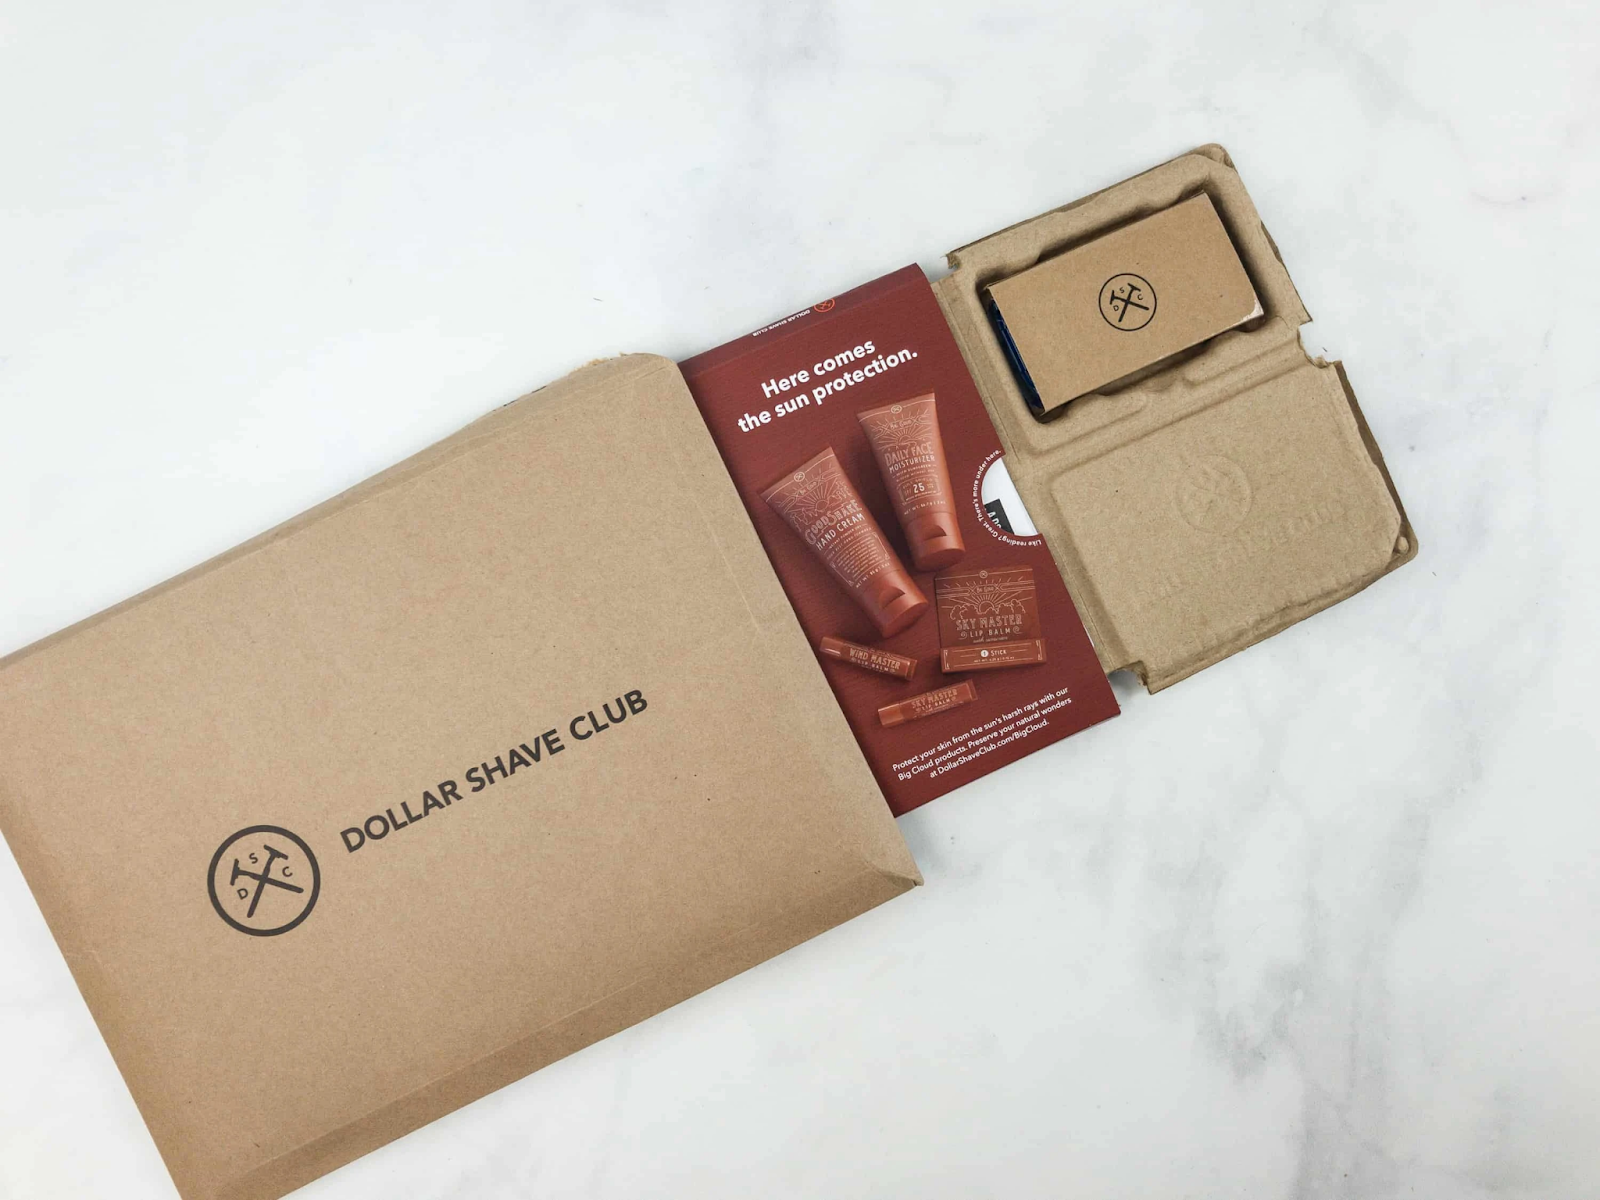 Dollar Shave Club brown cardboard box with logo printed on top and products inside